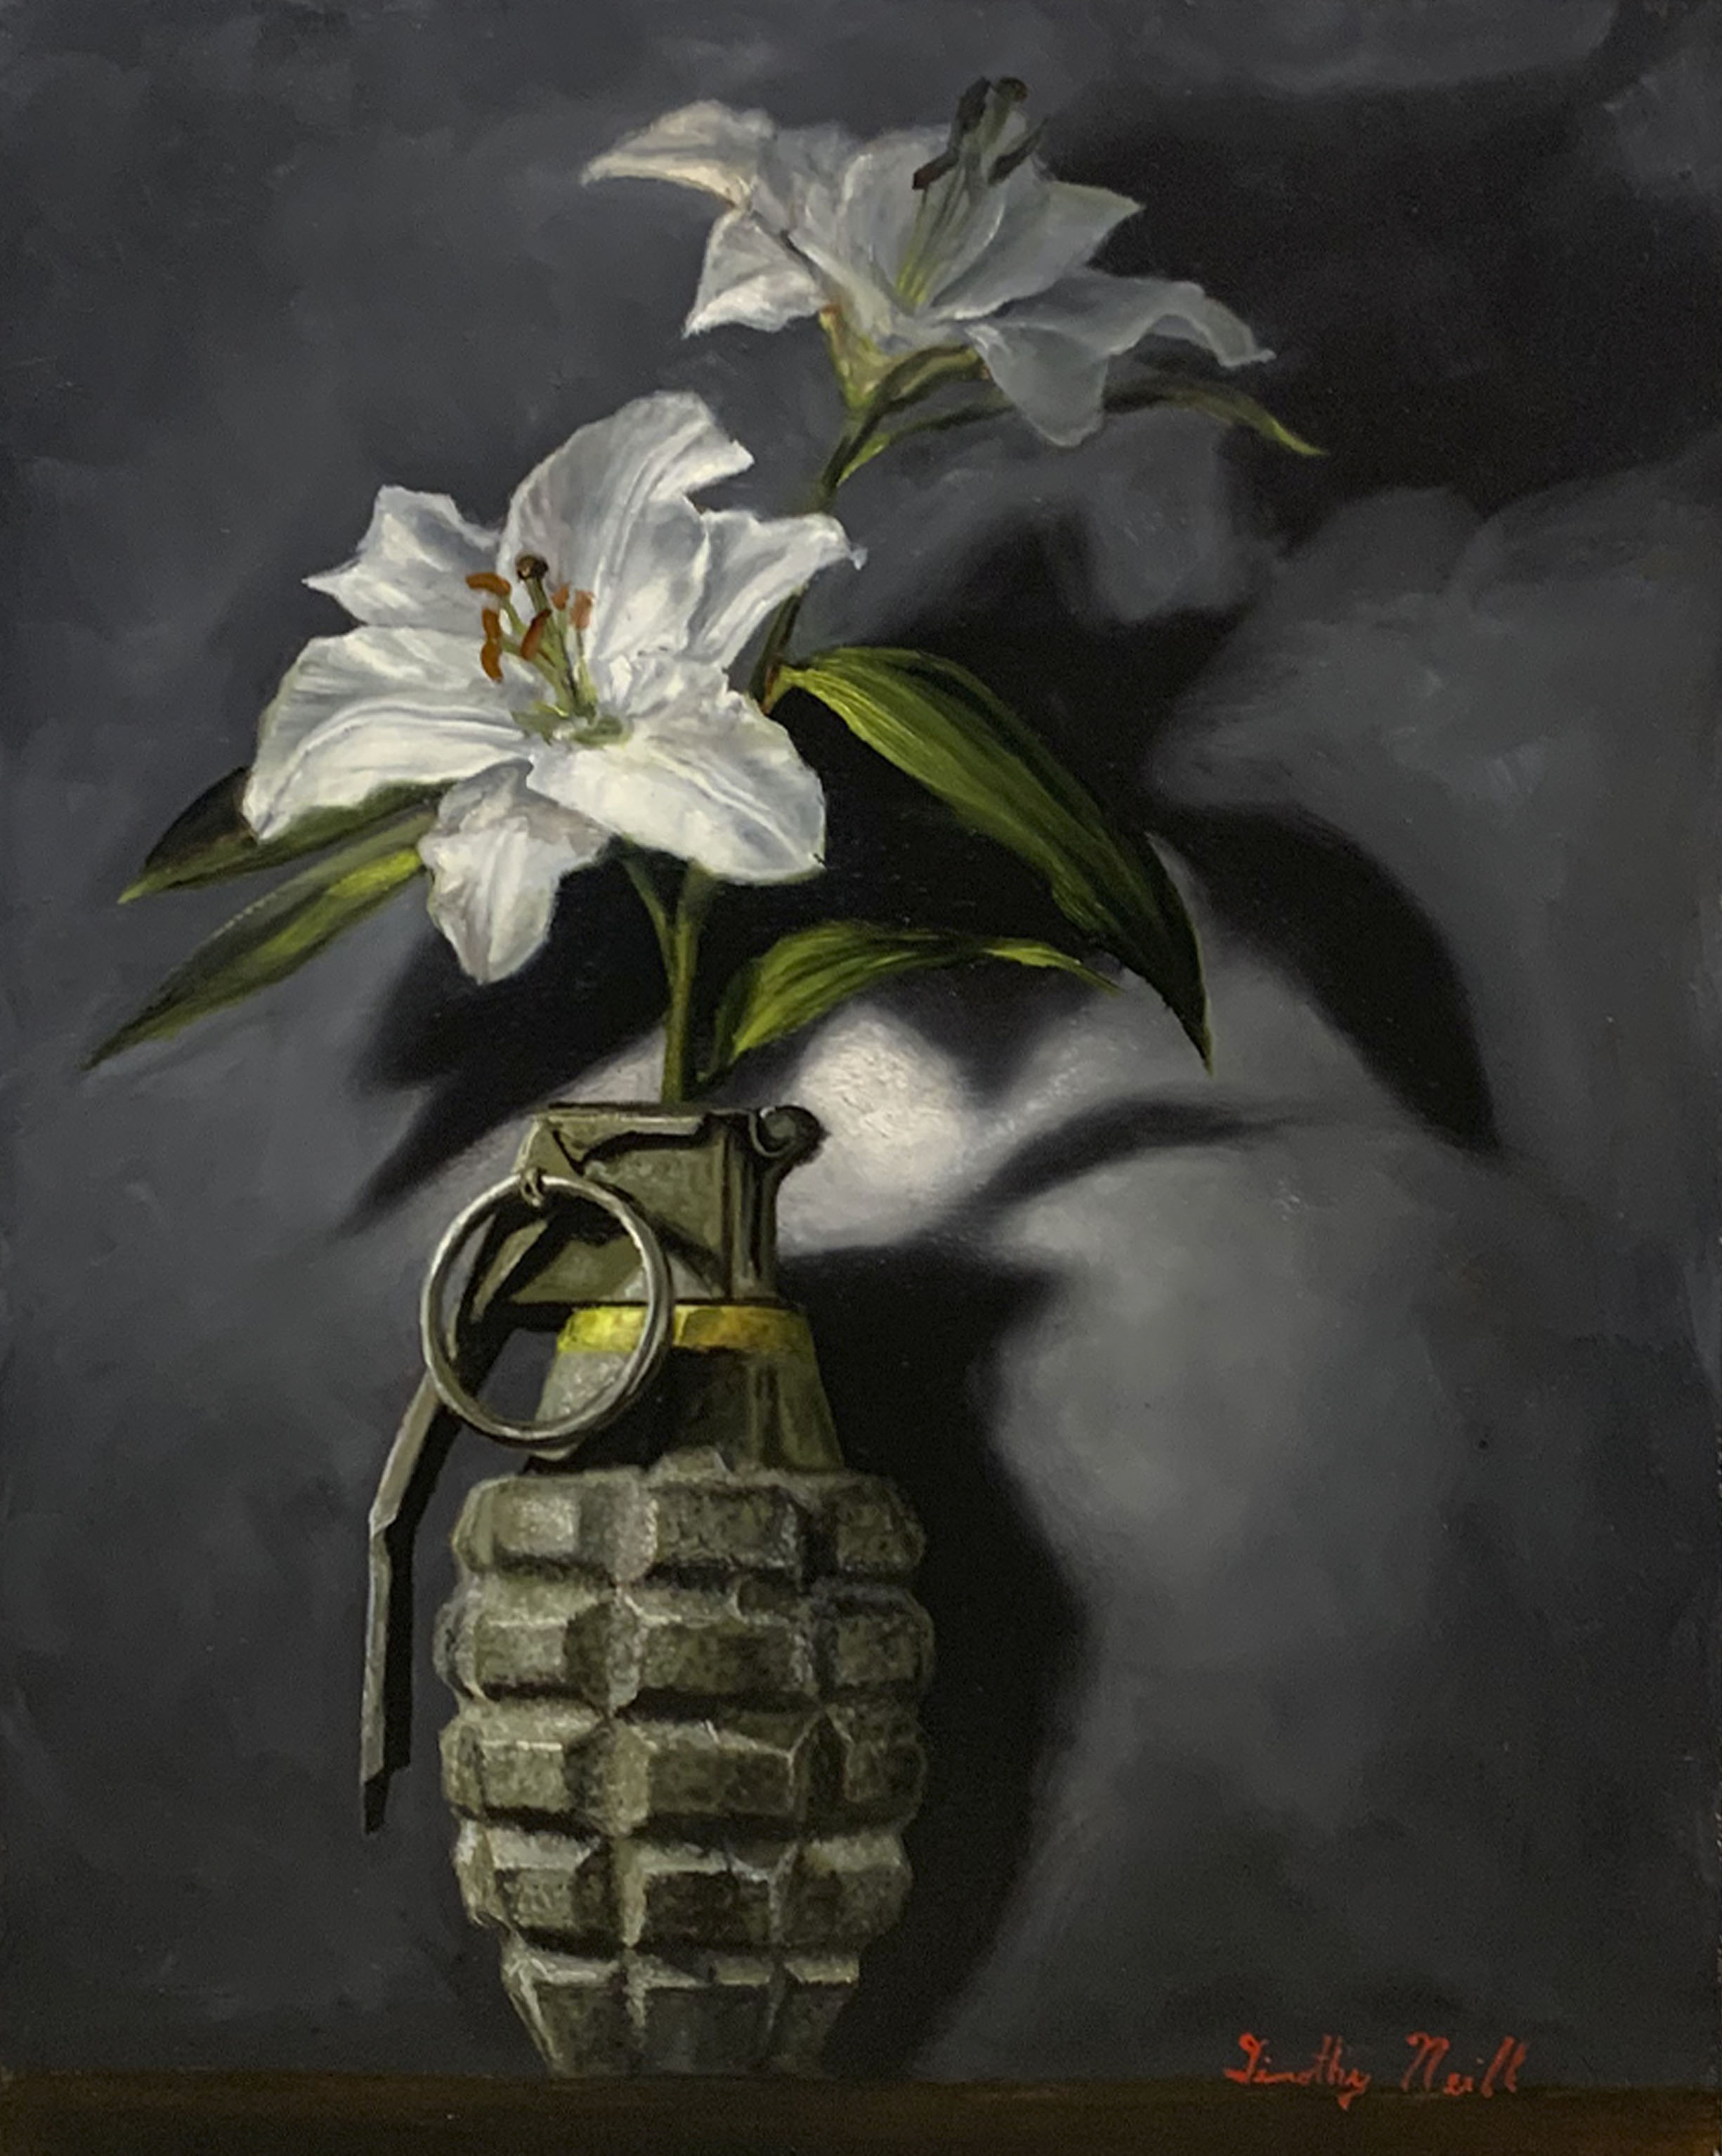 Lilies in a Green Vase